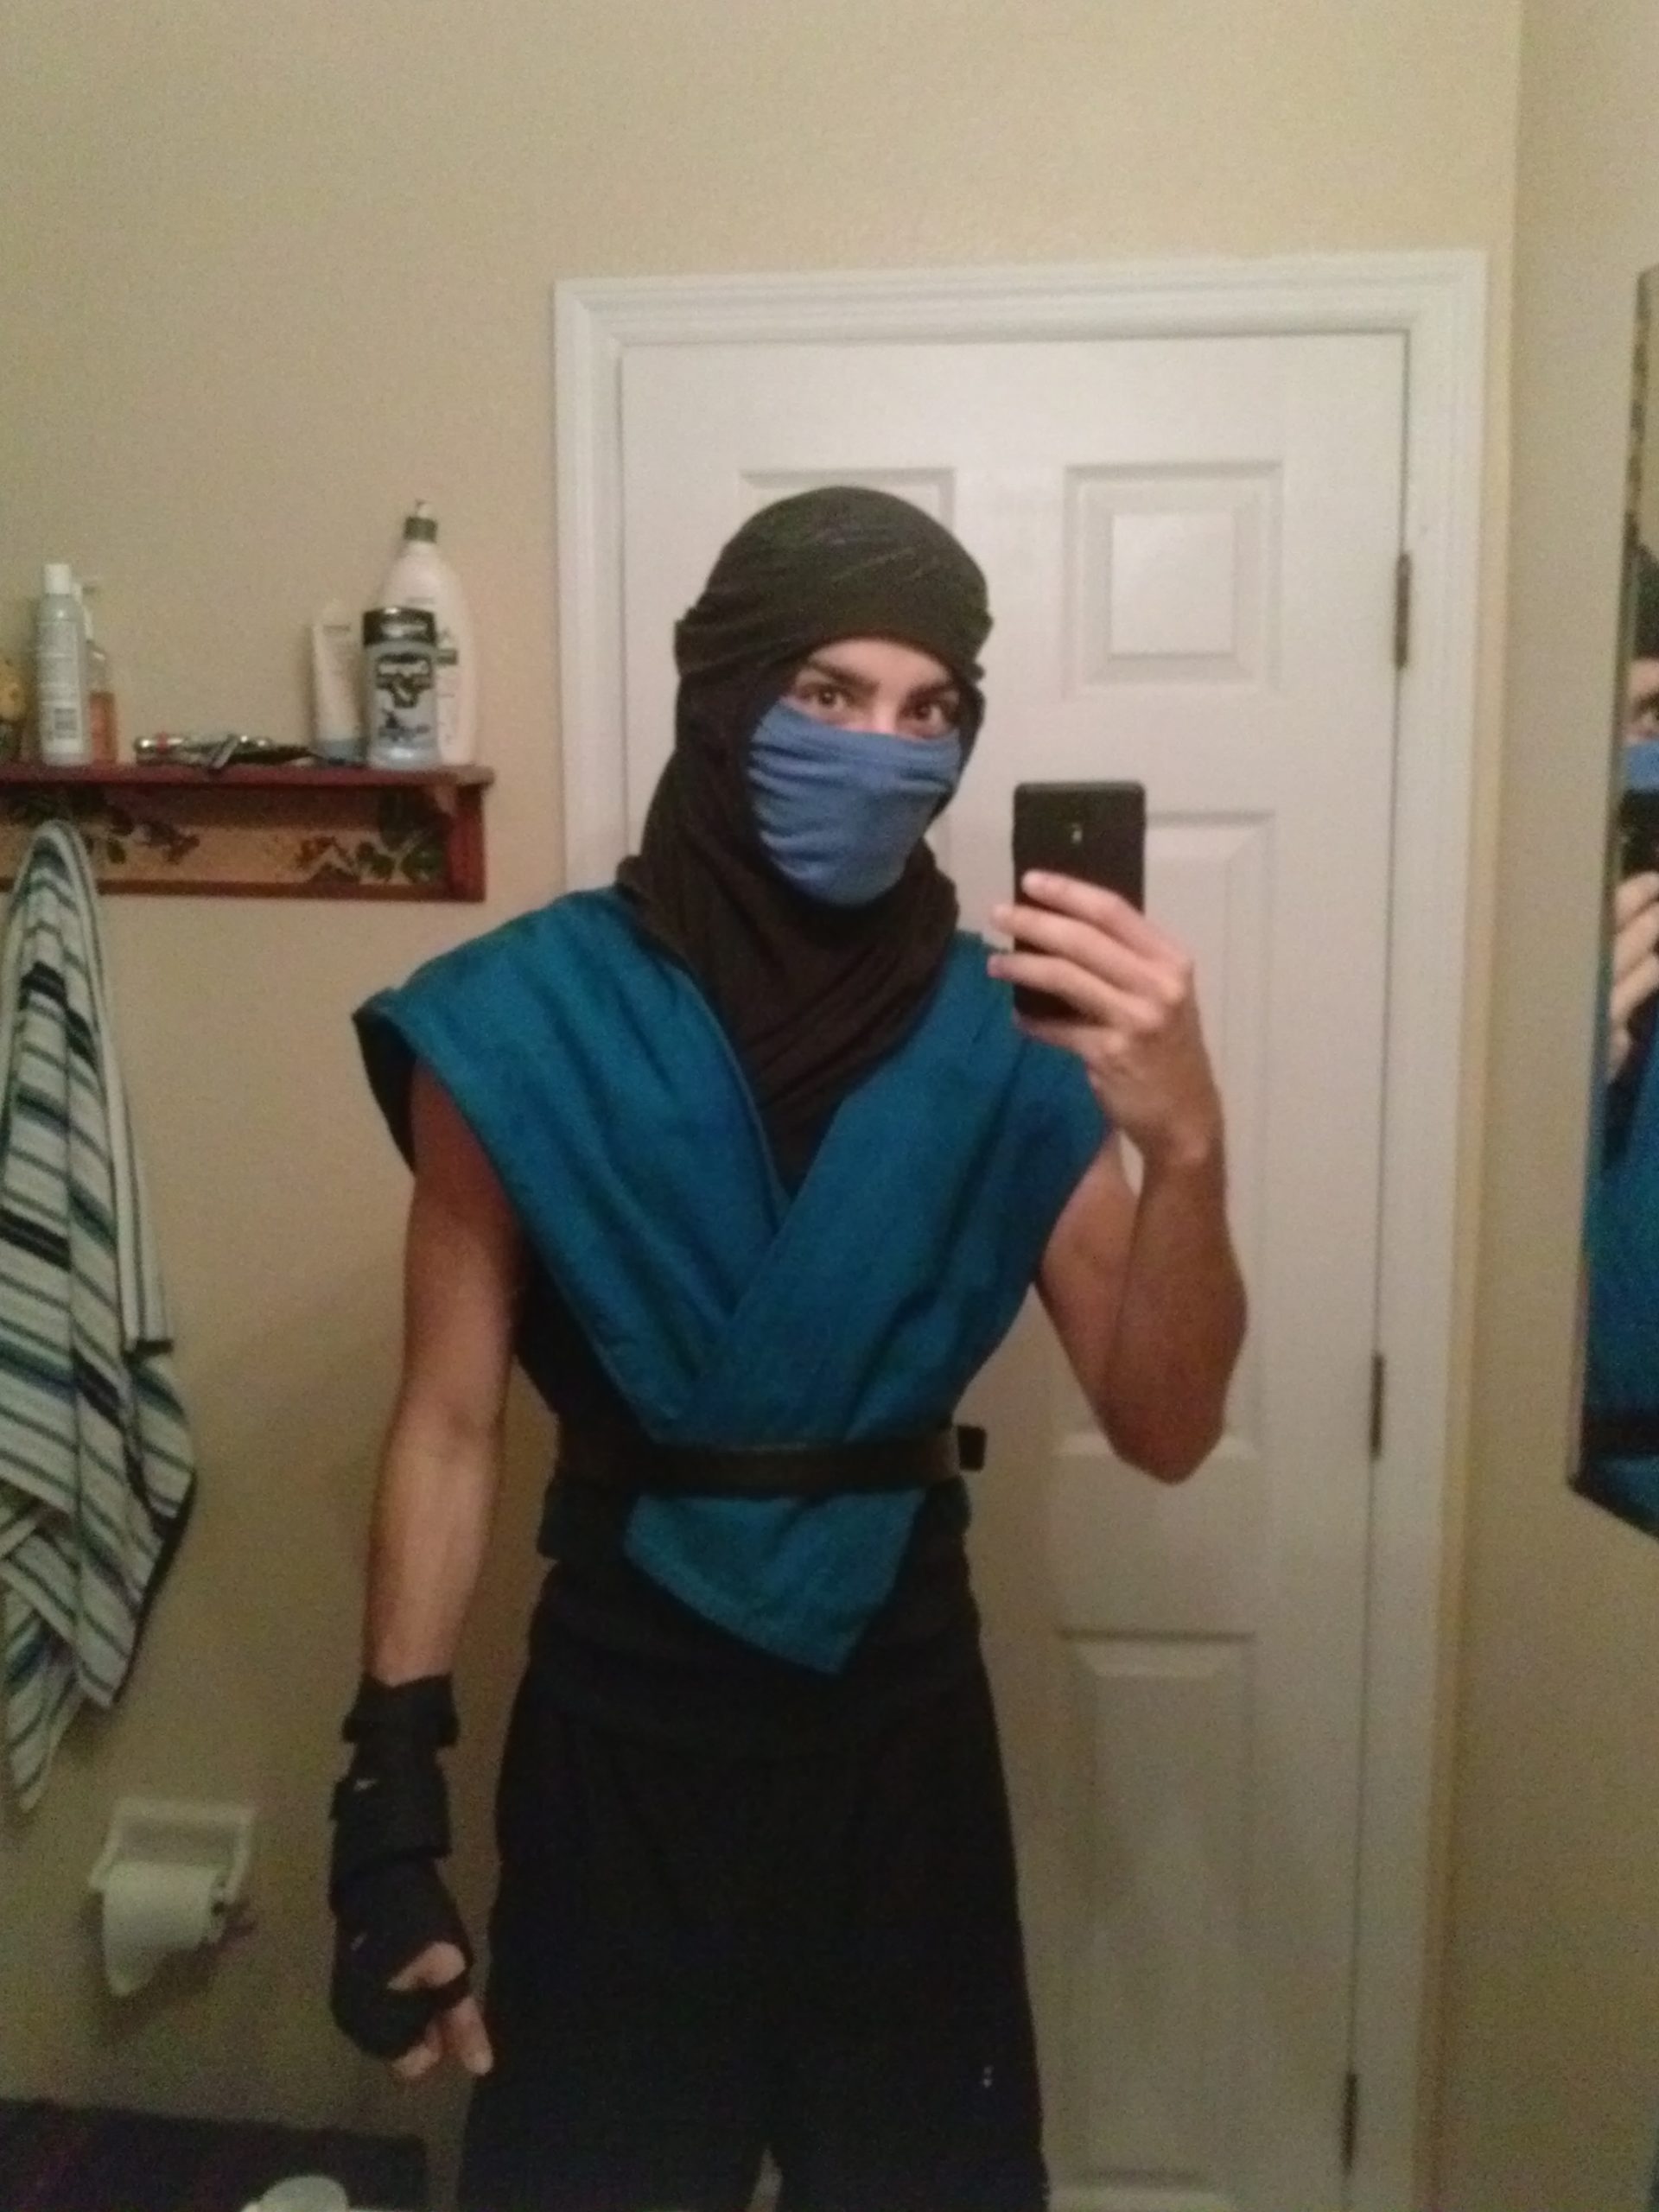 Create Your Own Mortal Kombat Cosplay With This One Weird Trick